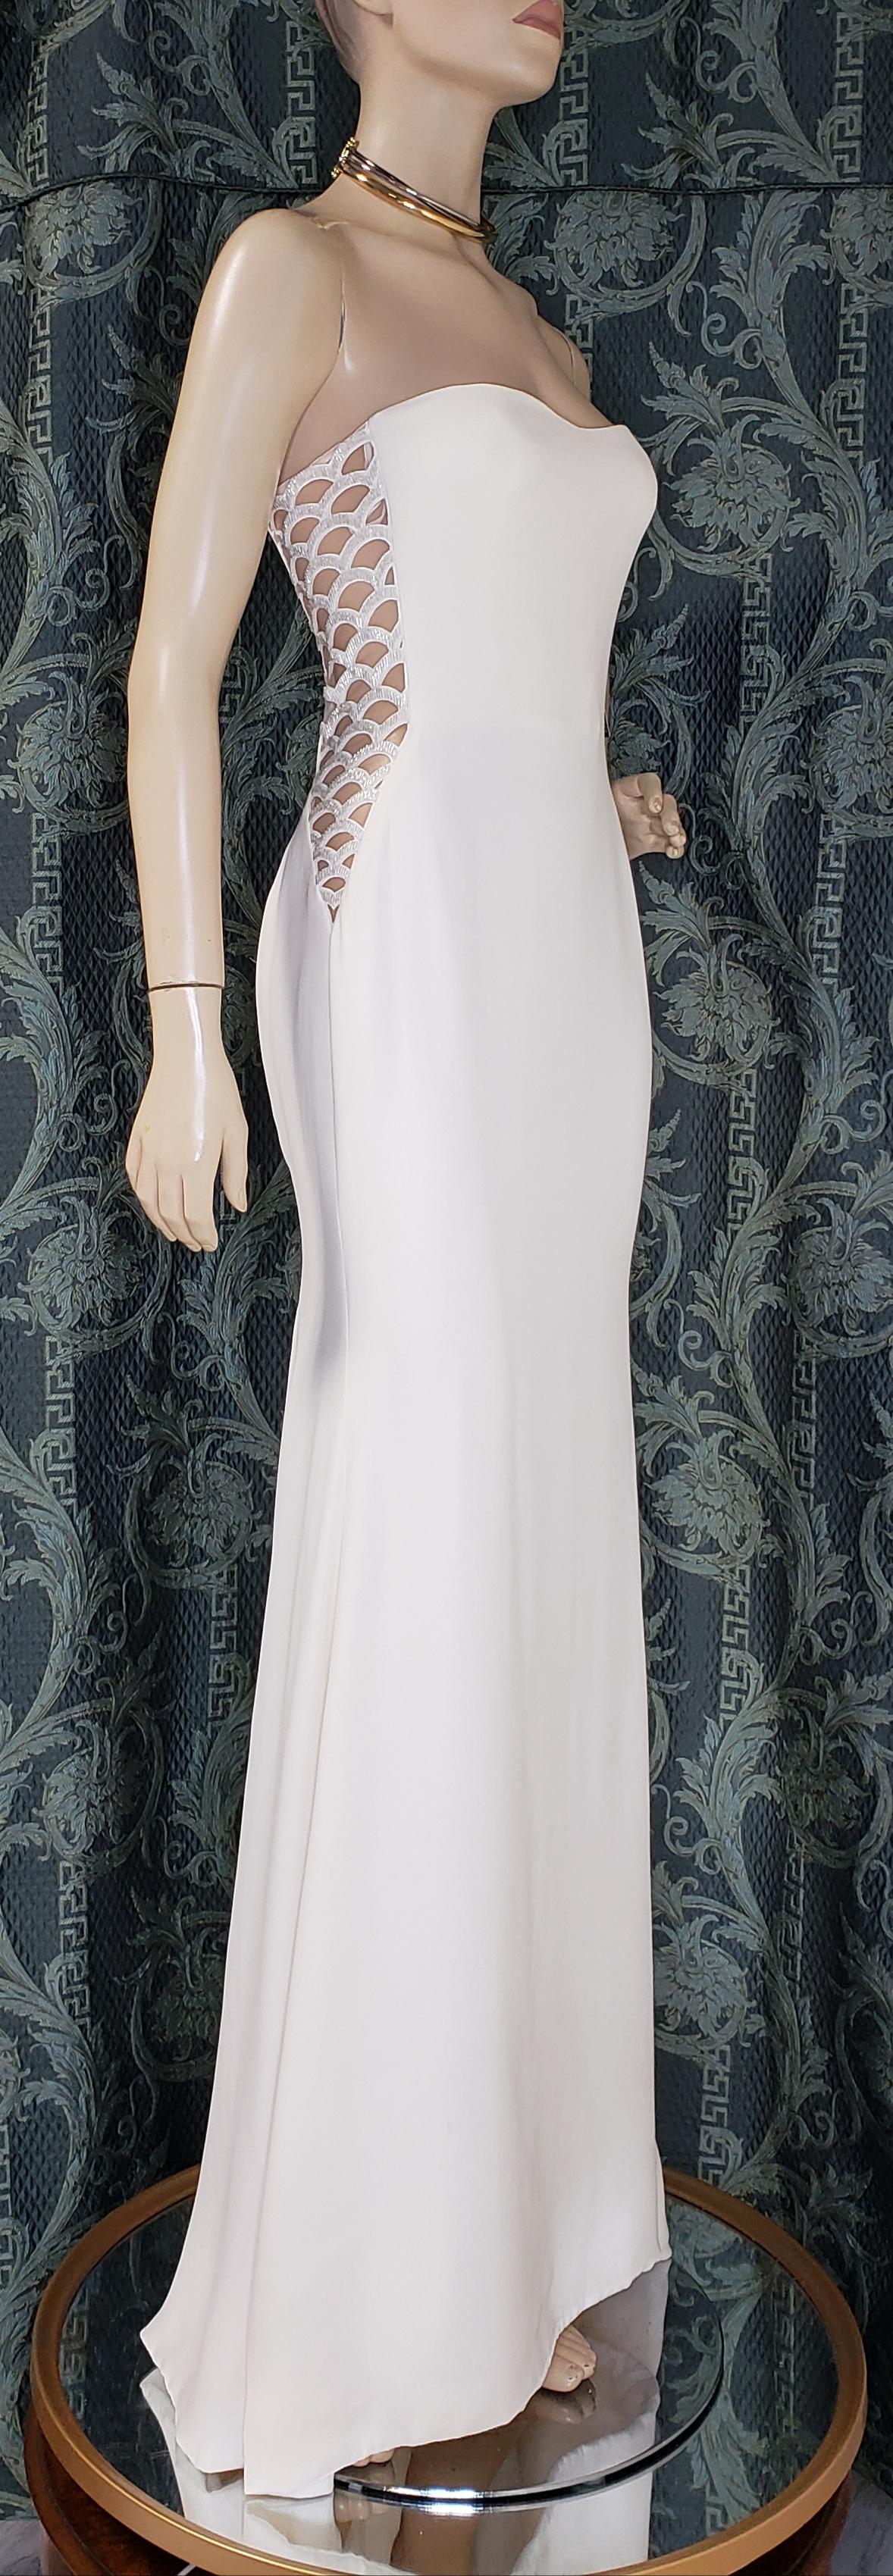 Vintage Gianni Versace Couture Beaded Silk and Tulle White Gown 40 - 4 1